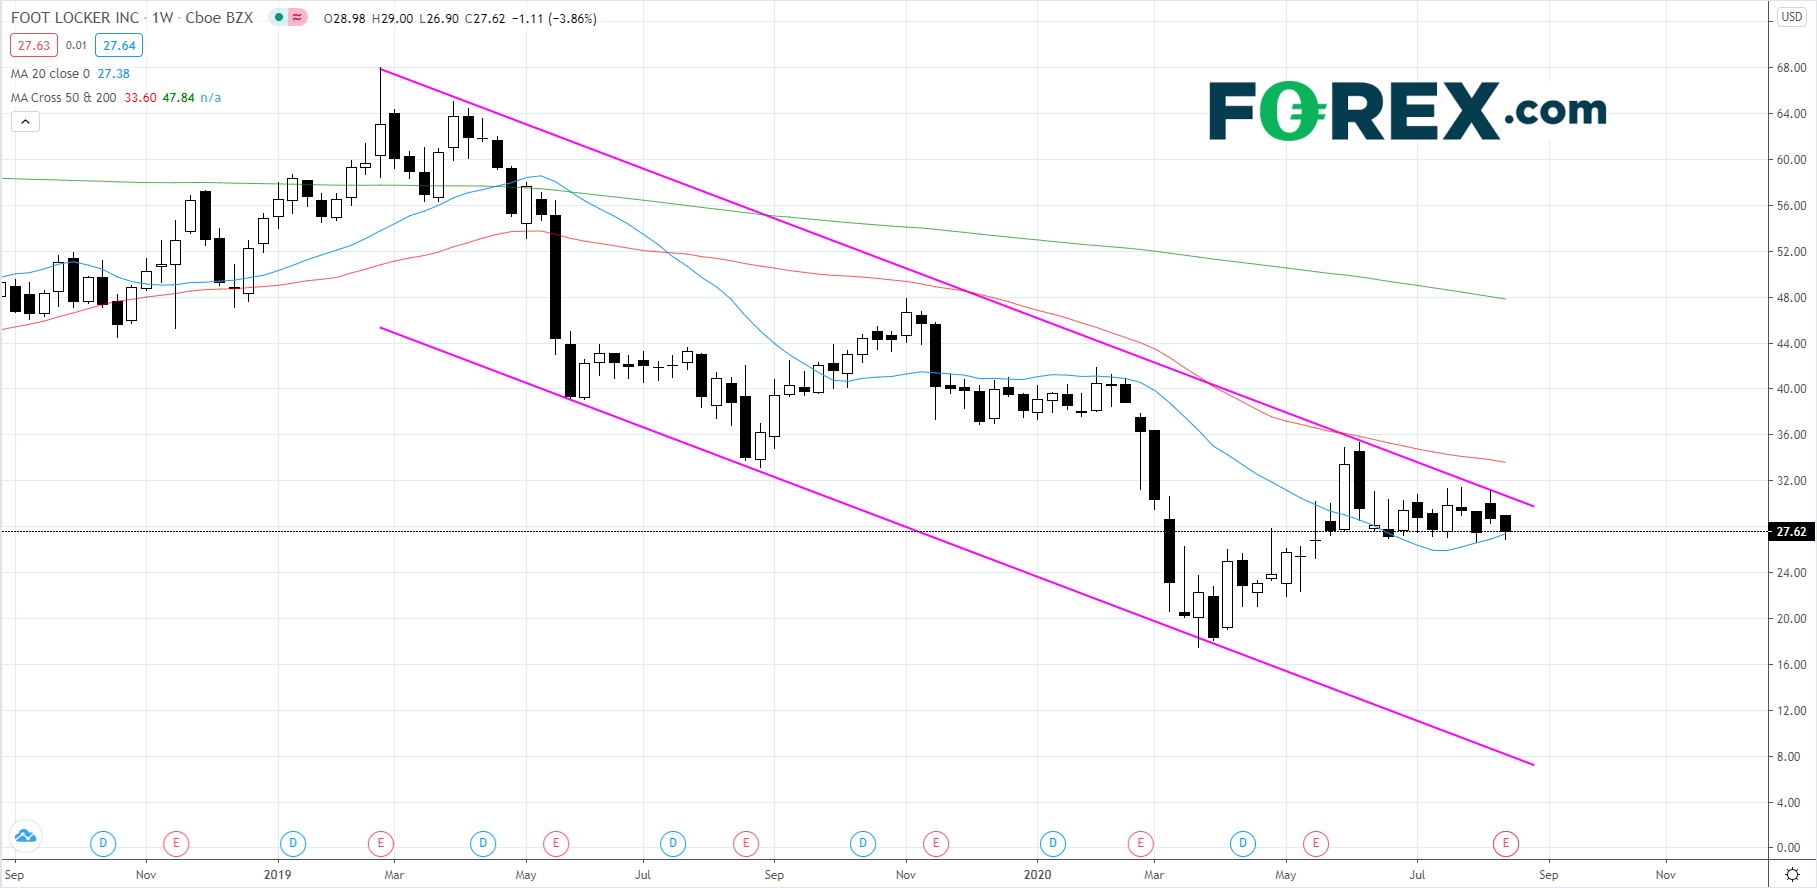 Chart demonstrating Foot Locker performance. Published in August 2020 by FOREX.com